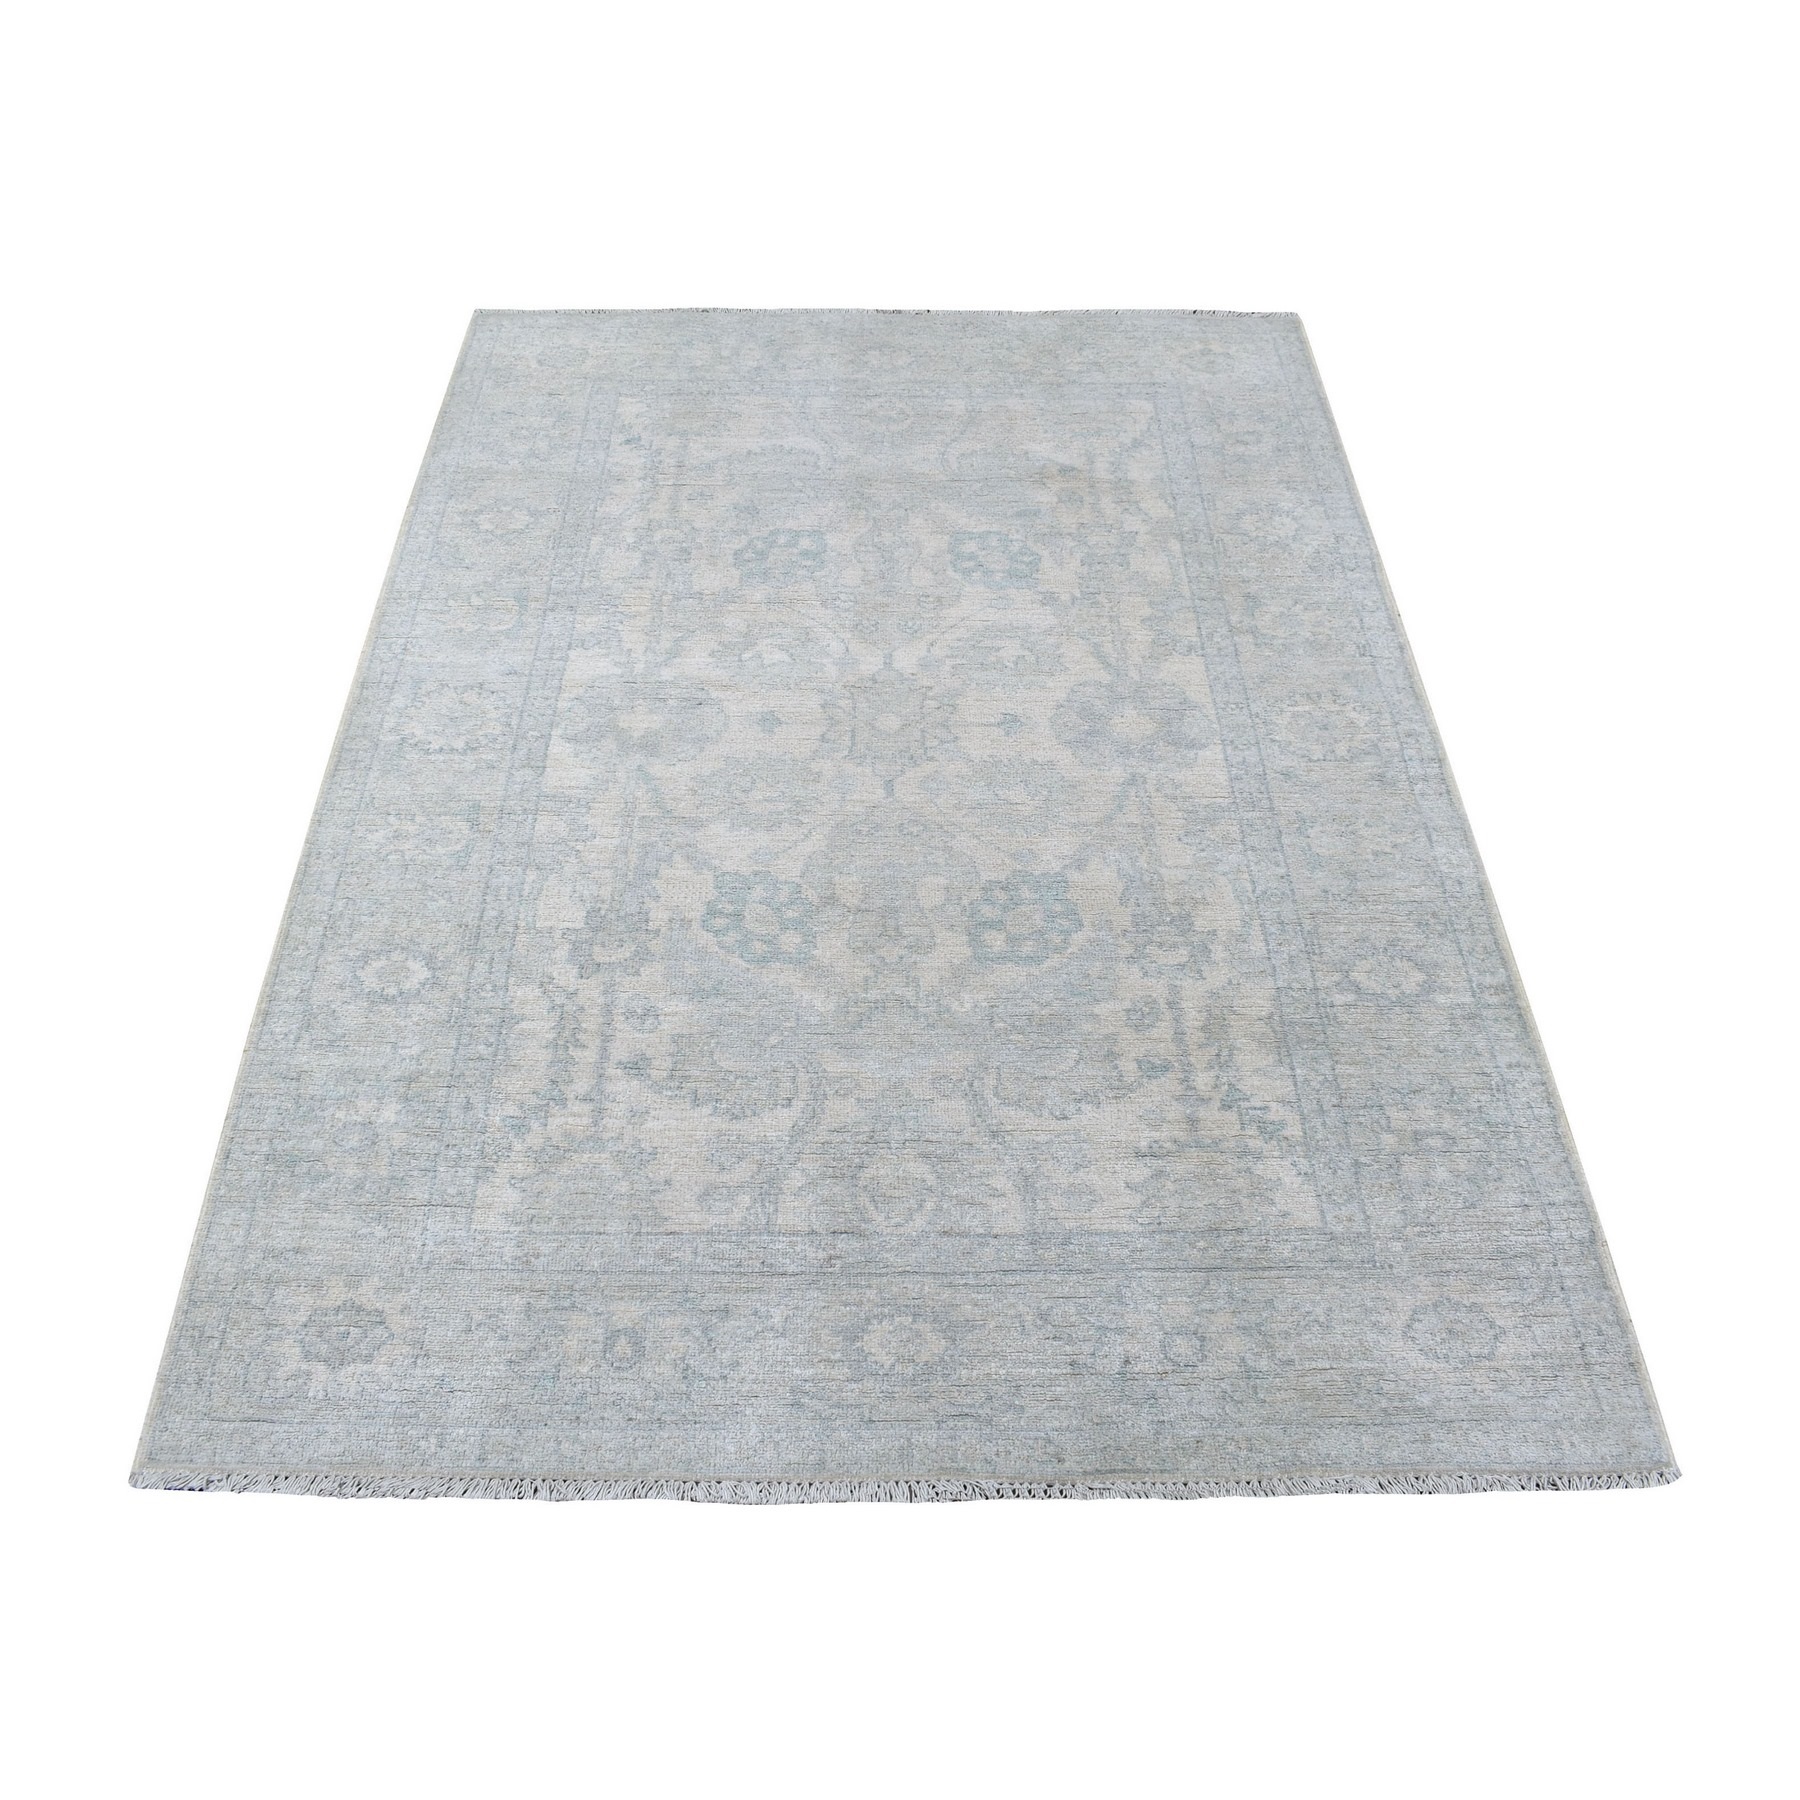 Agra And Turkish Collection Hand Knotted Beige Rug No: 1135010